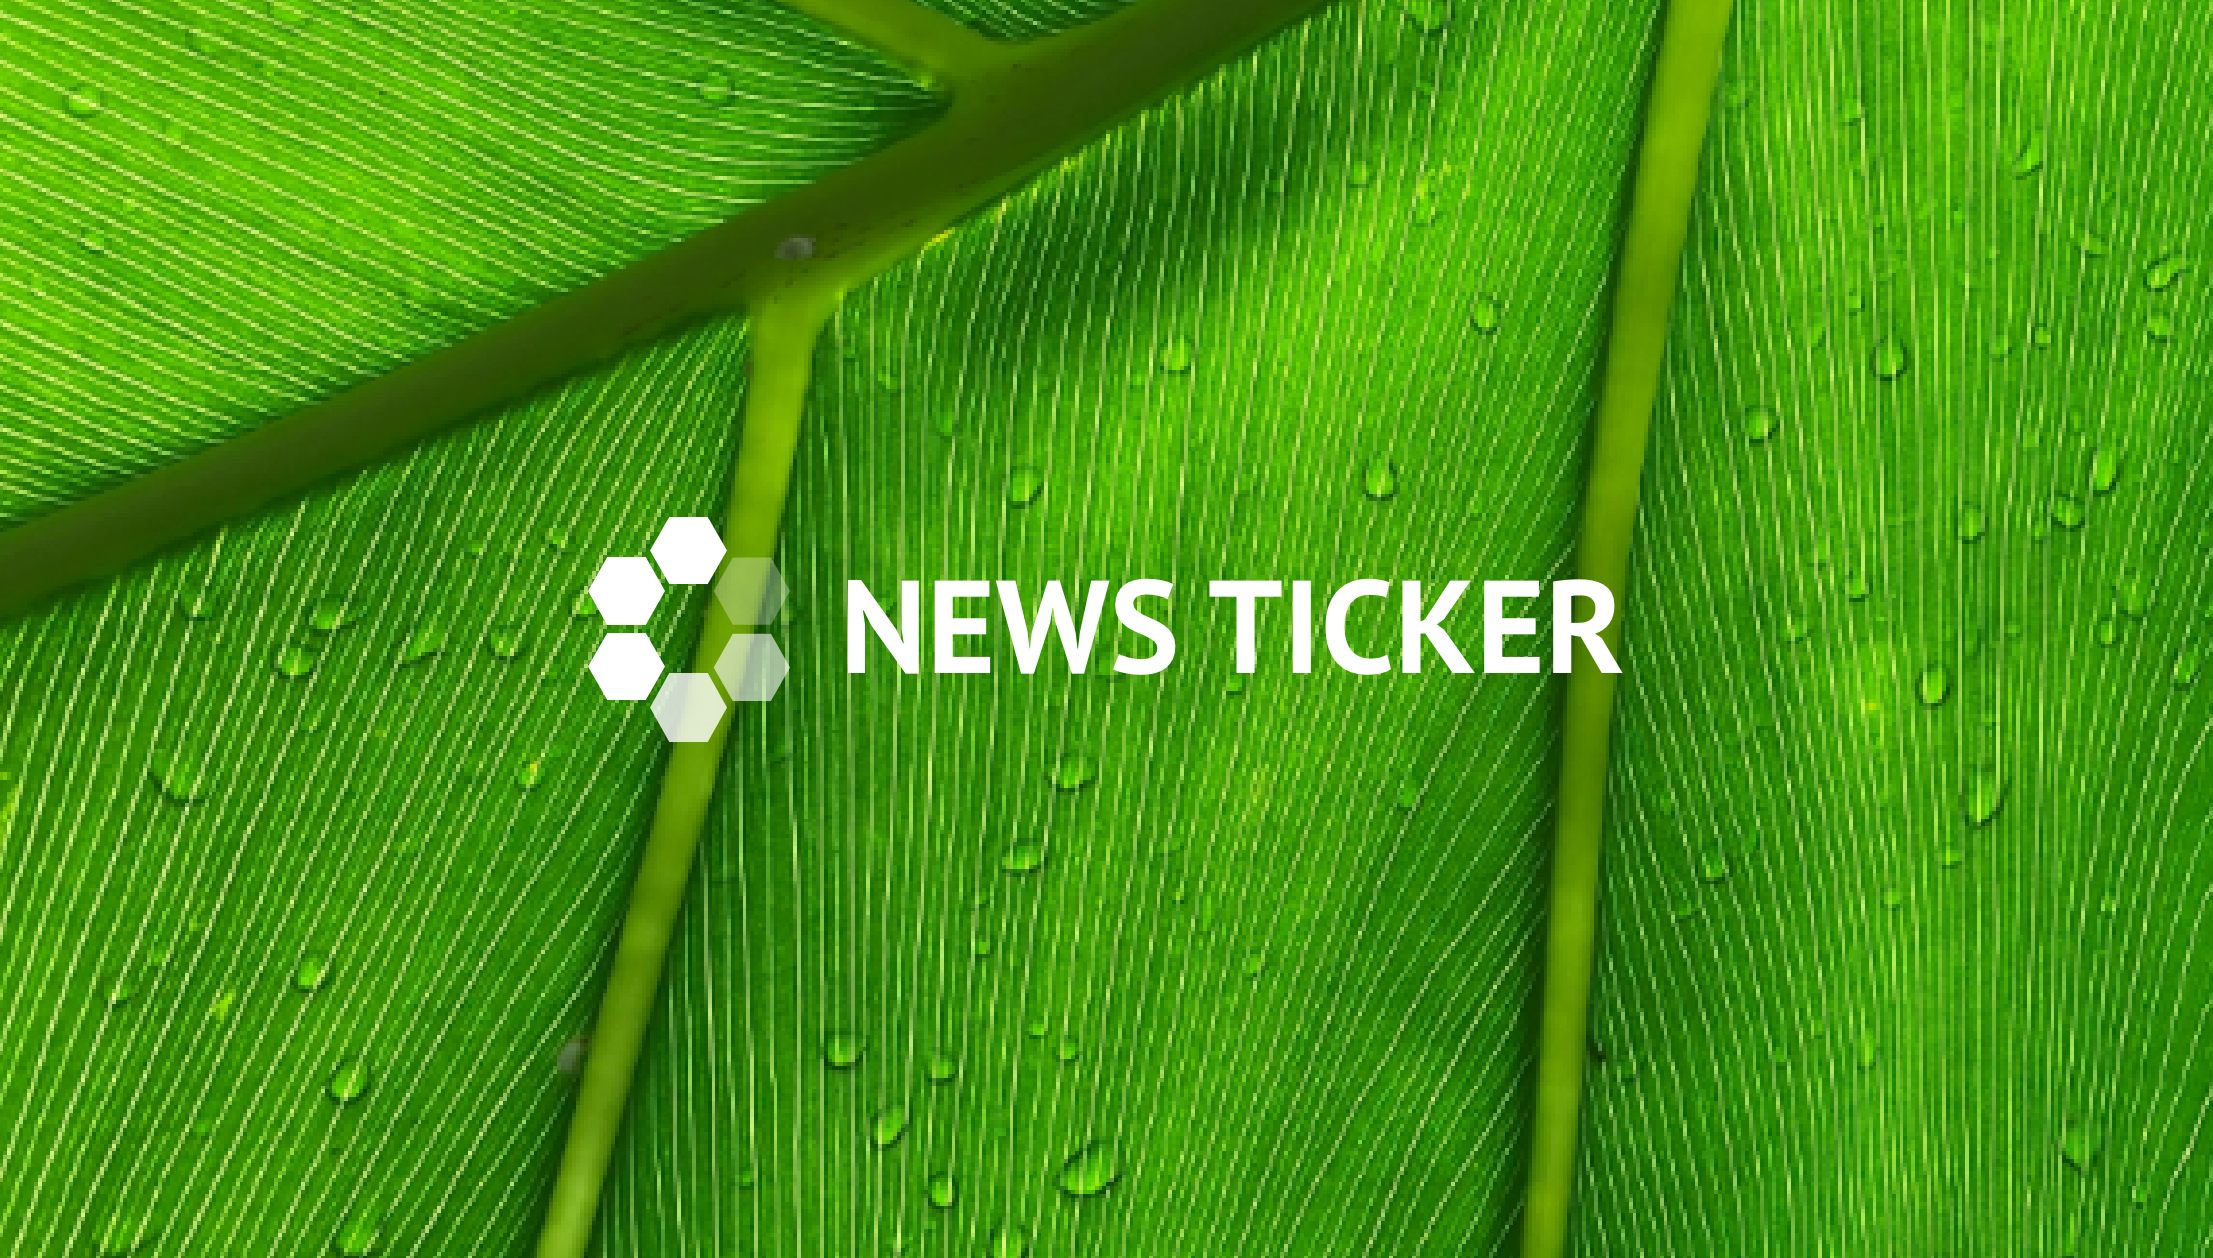 You can see a green leave and the text "SET News Ticker"